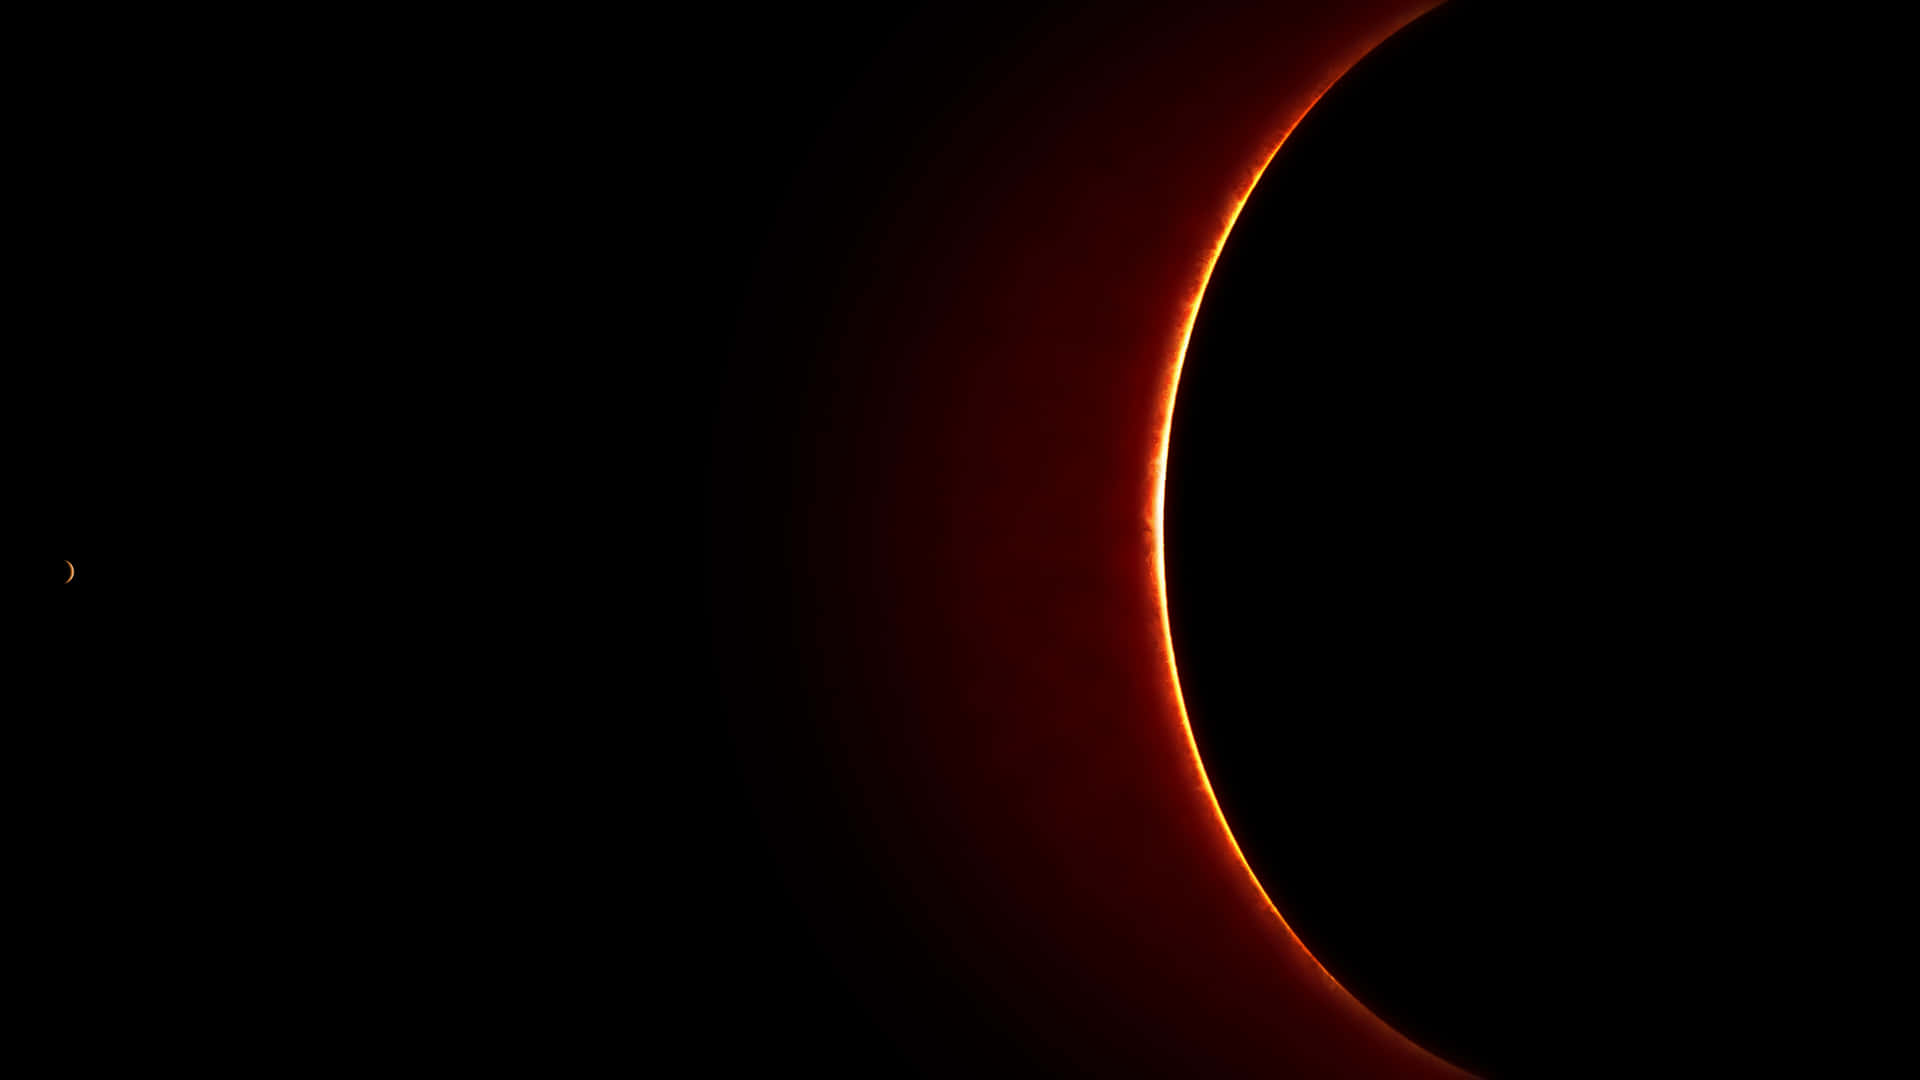 A View Of The Sun With A Red Ring Around It Wallpaper